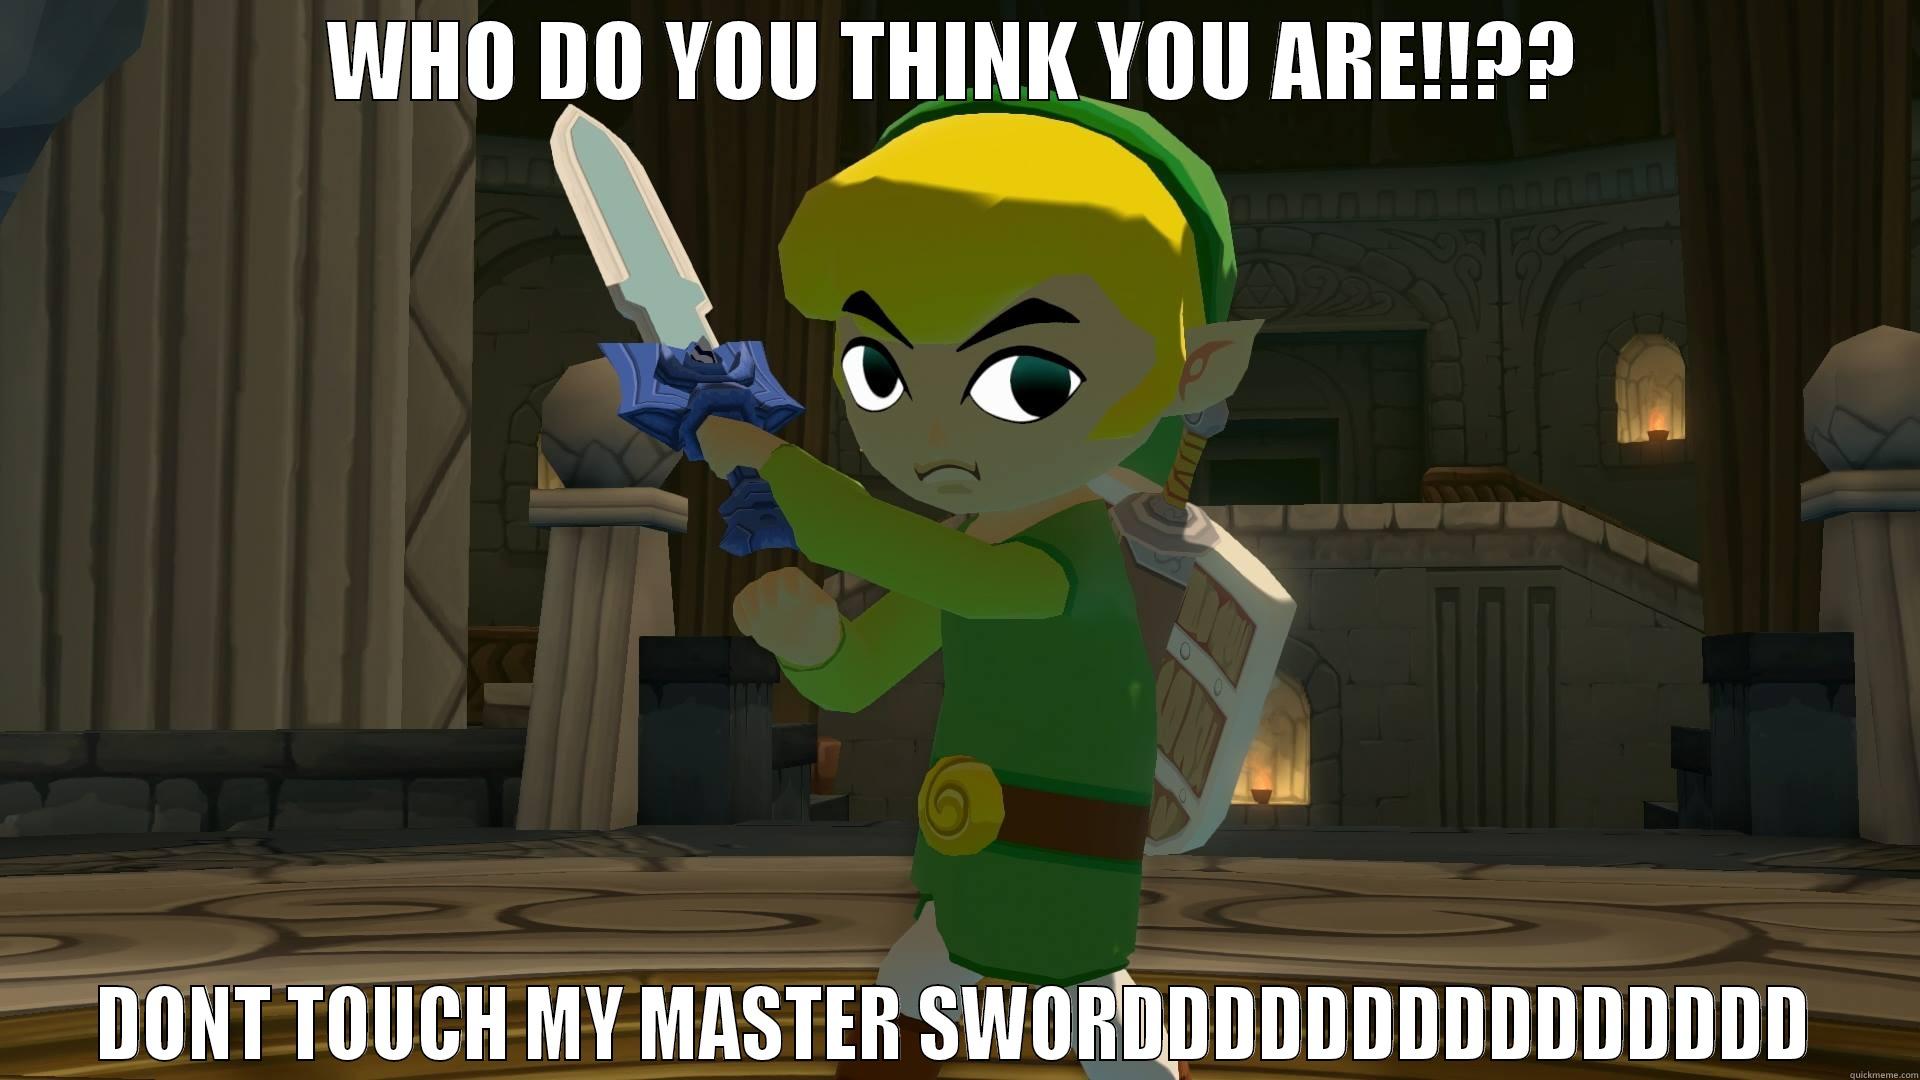 dont touch link mastersword - WHO DO YOU THINK YOU ARE!!?? DONT TOUCH MY MASTER SWORDDDDDDDDDDDDDDD Misc